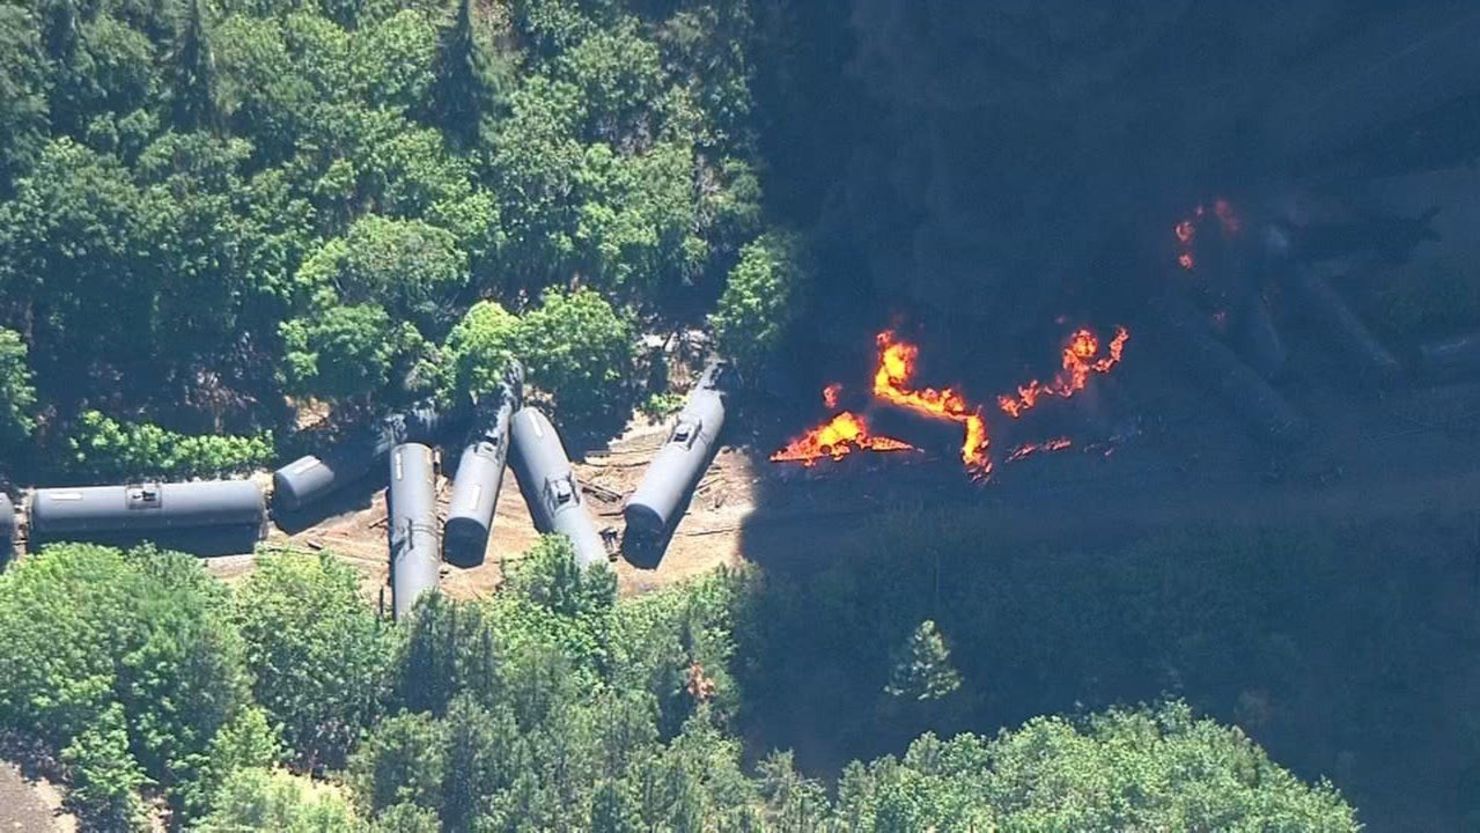 A train derailment in the Columbia River Gorge sent a massive column of black smoke into the sky Friday afternoon.